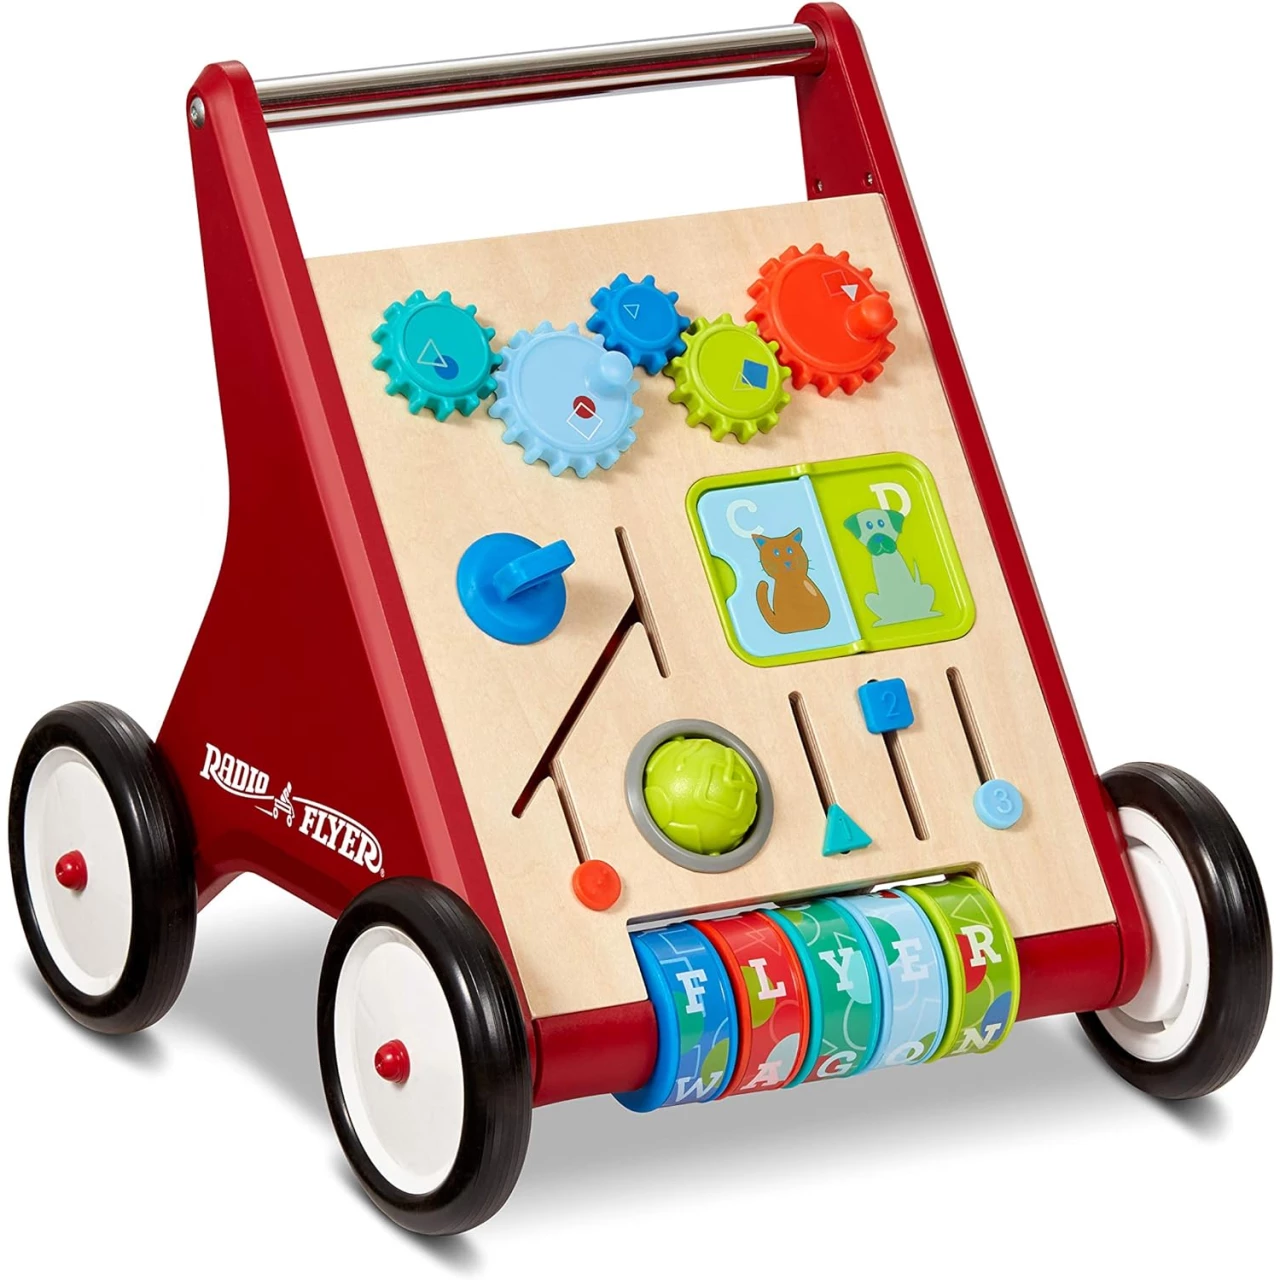 Radio Flyer Classic Push &amp; Play Walker, Toddler Walker with Activity Play, Ages 1-4, Red Walker Toy